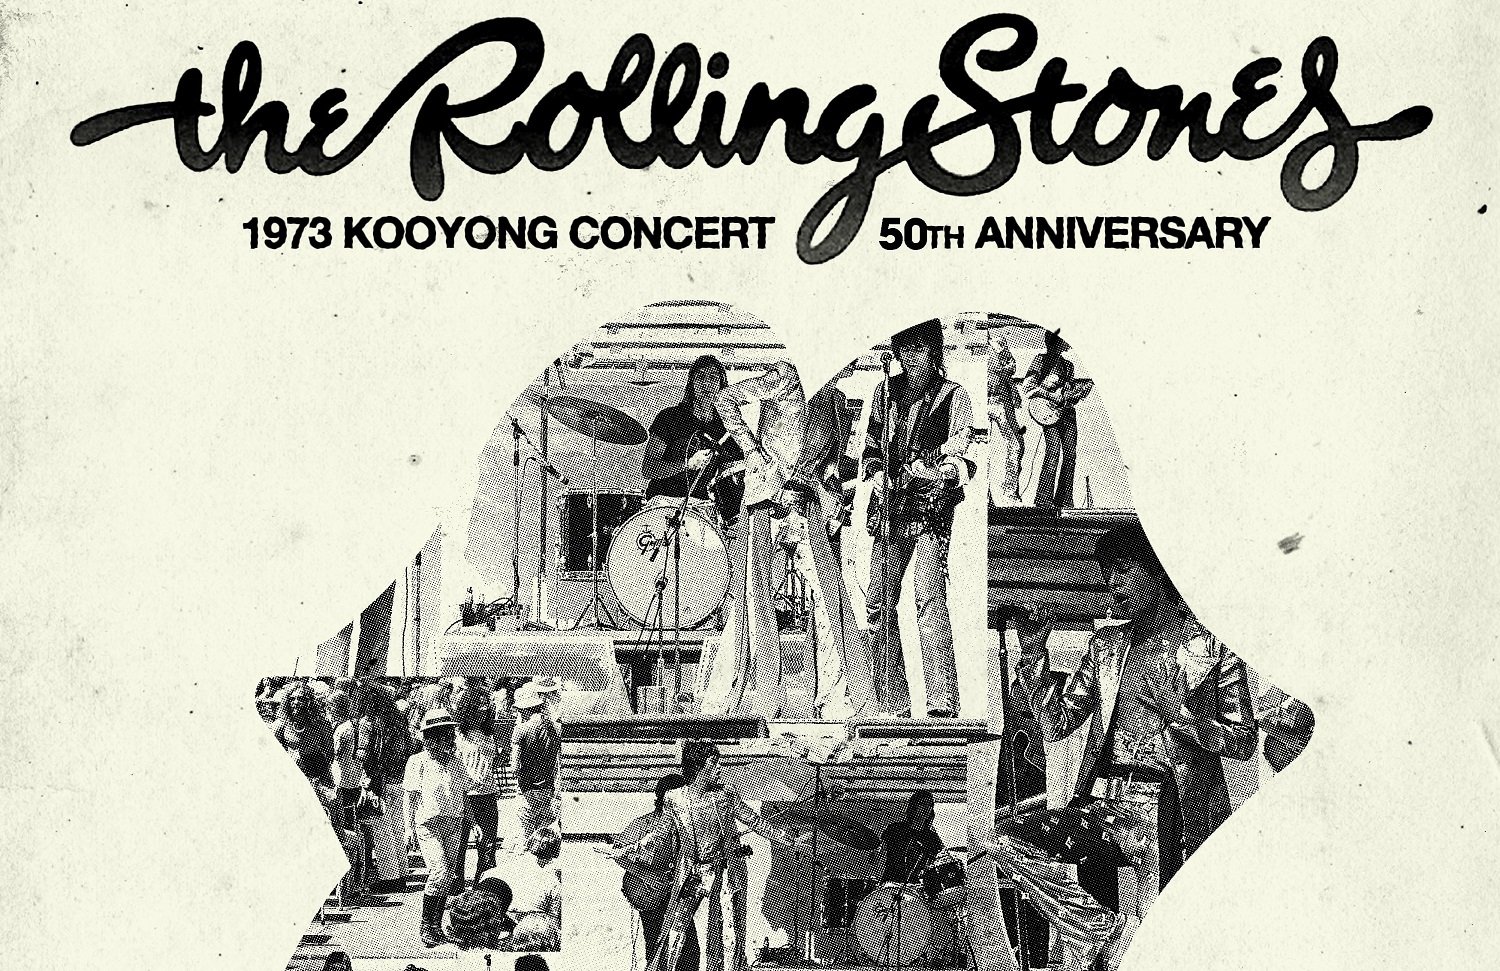 The Rolling Stones Kooyong 50th Anniversary Concert